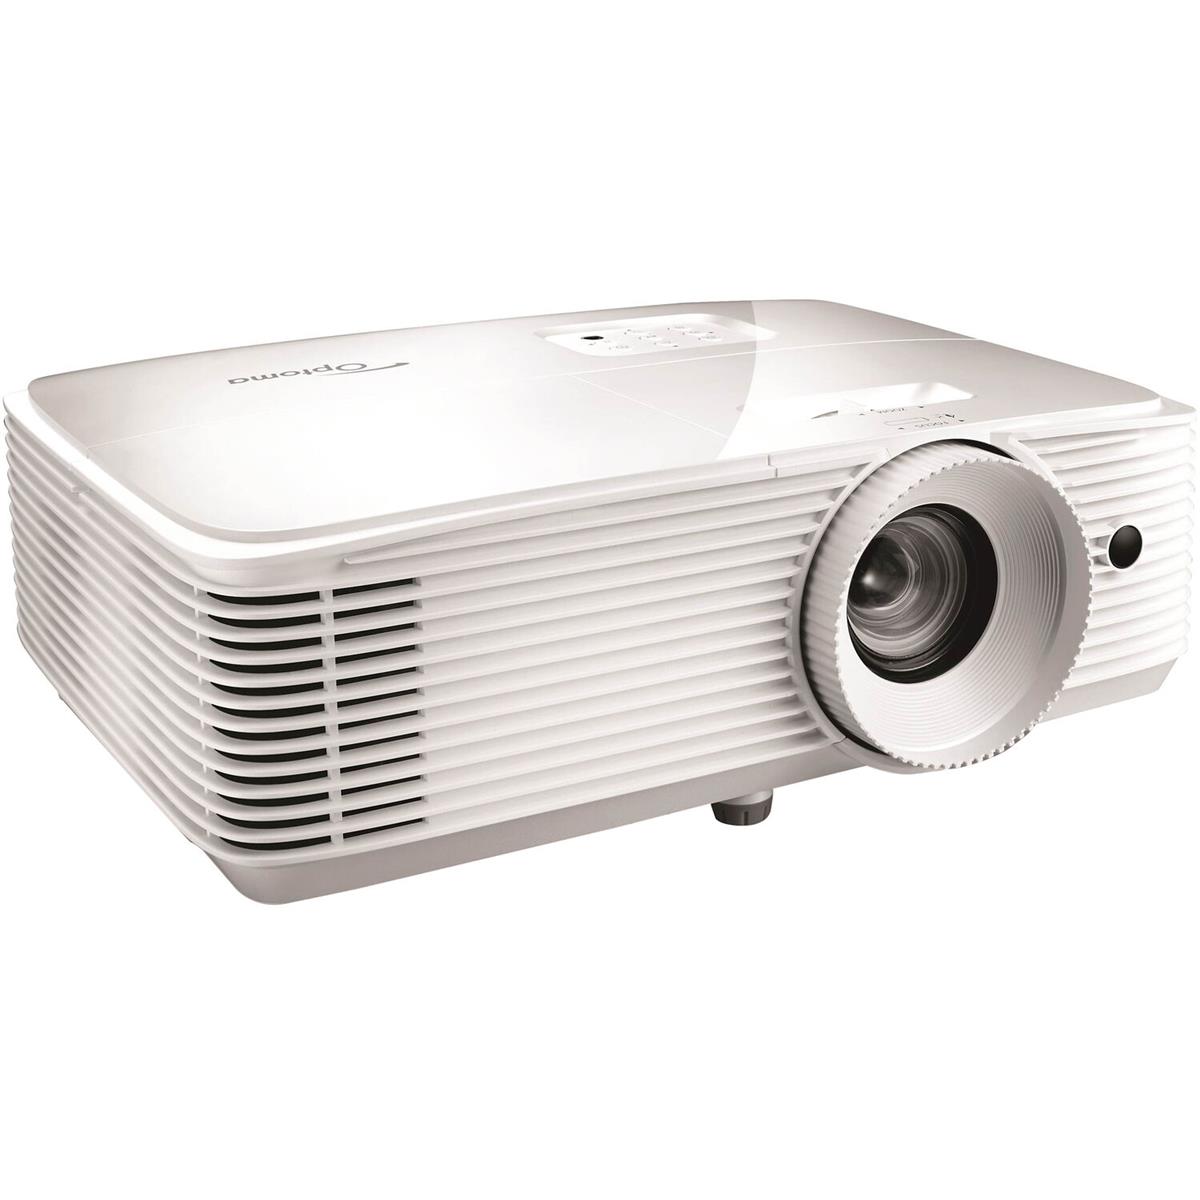 Full HD Full 3D DLP Home Theater and Gaming Projector - Optoma HD39HDRX